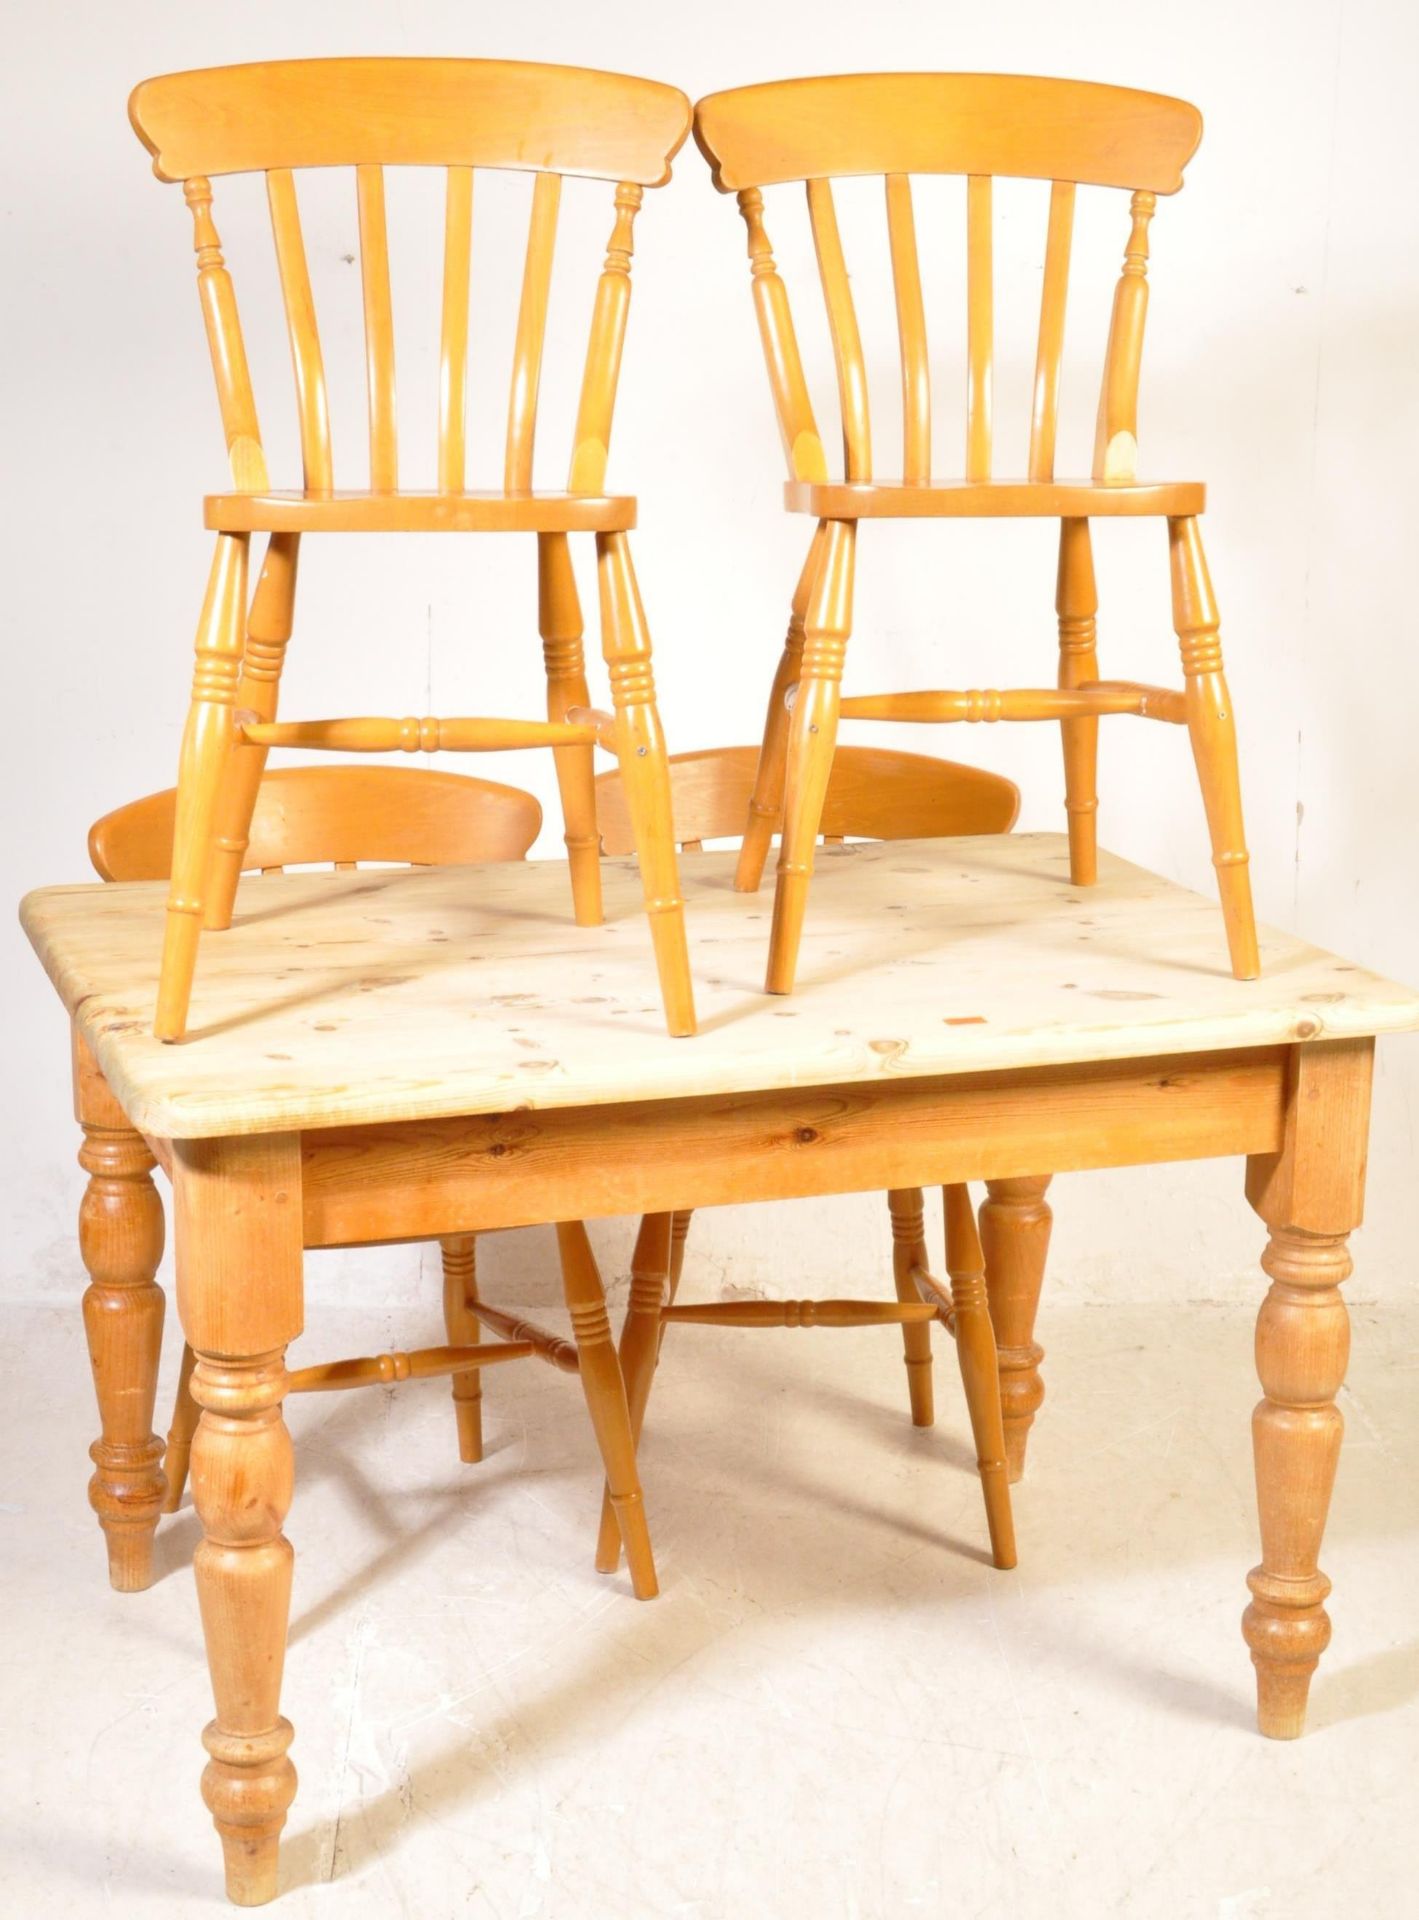 VICTORIAN STYLE COUNTRY CHUNKY OAK PINE TABLE & CHAIRS